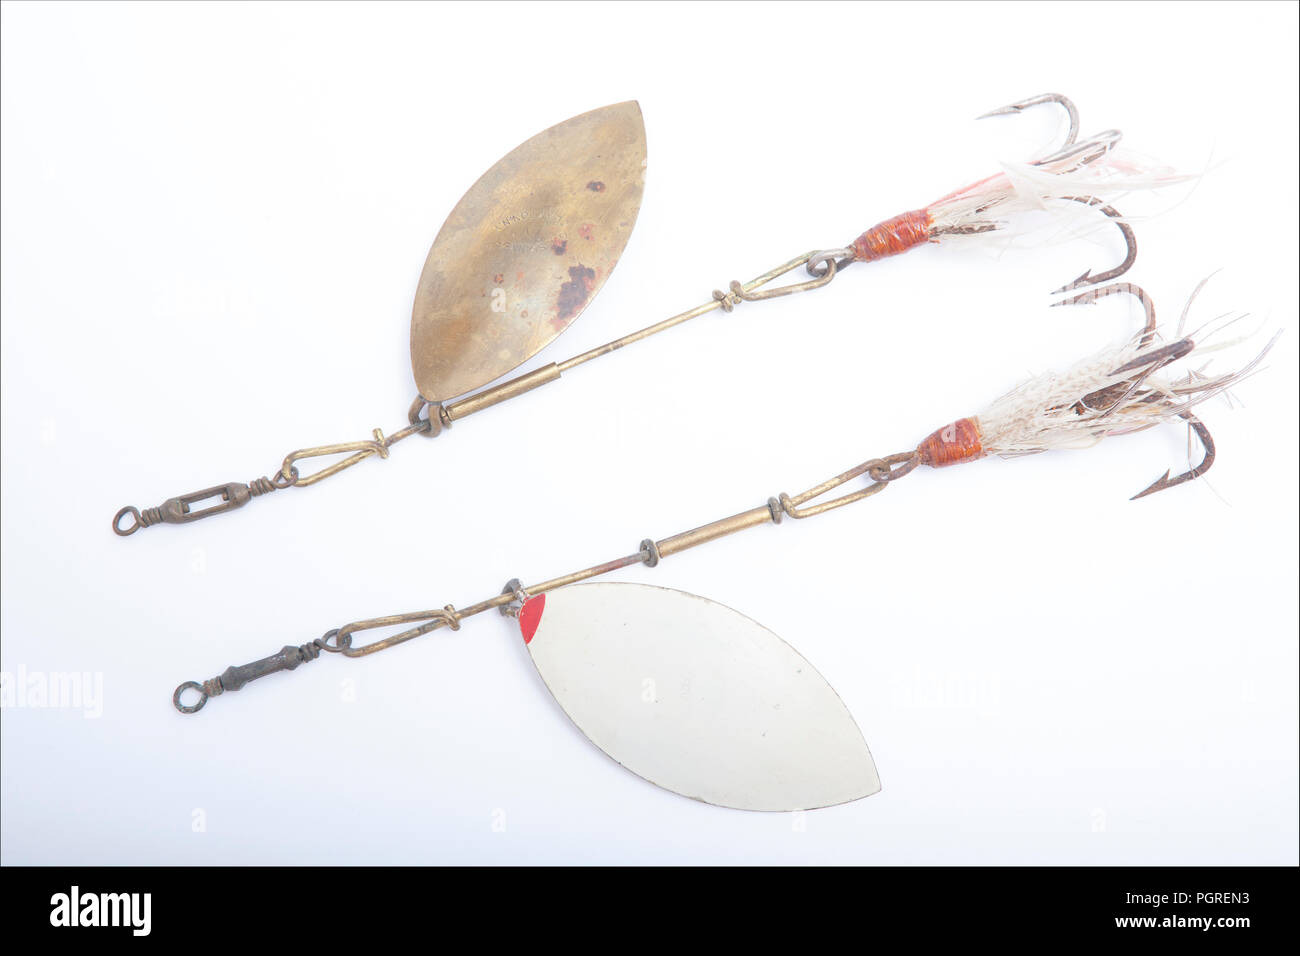 Vintage fishing lures equipped with treble hooks photographed on a